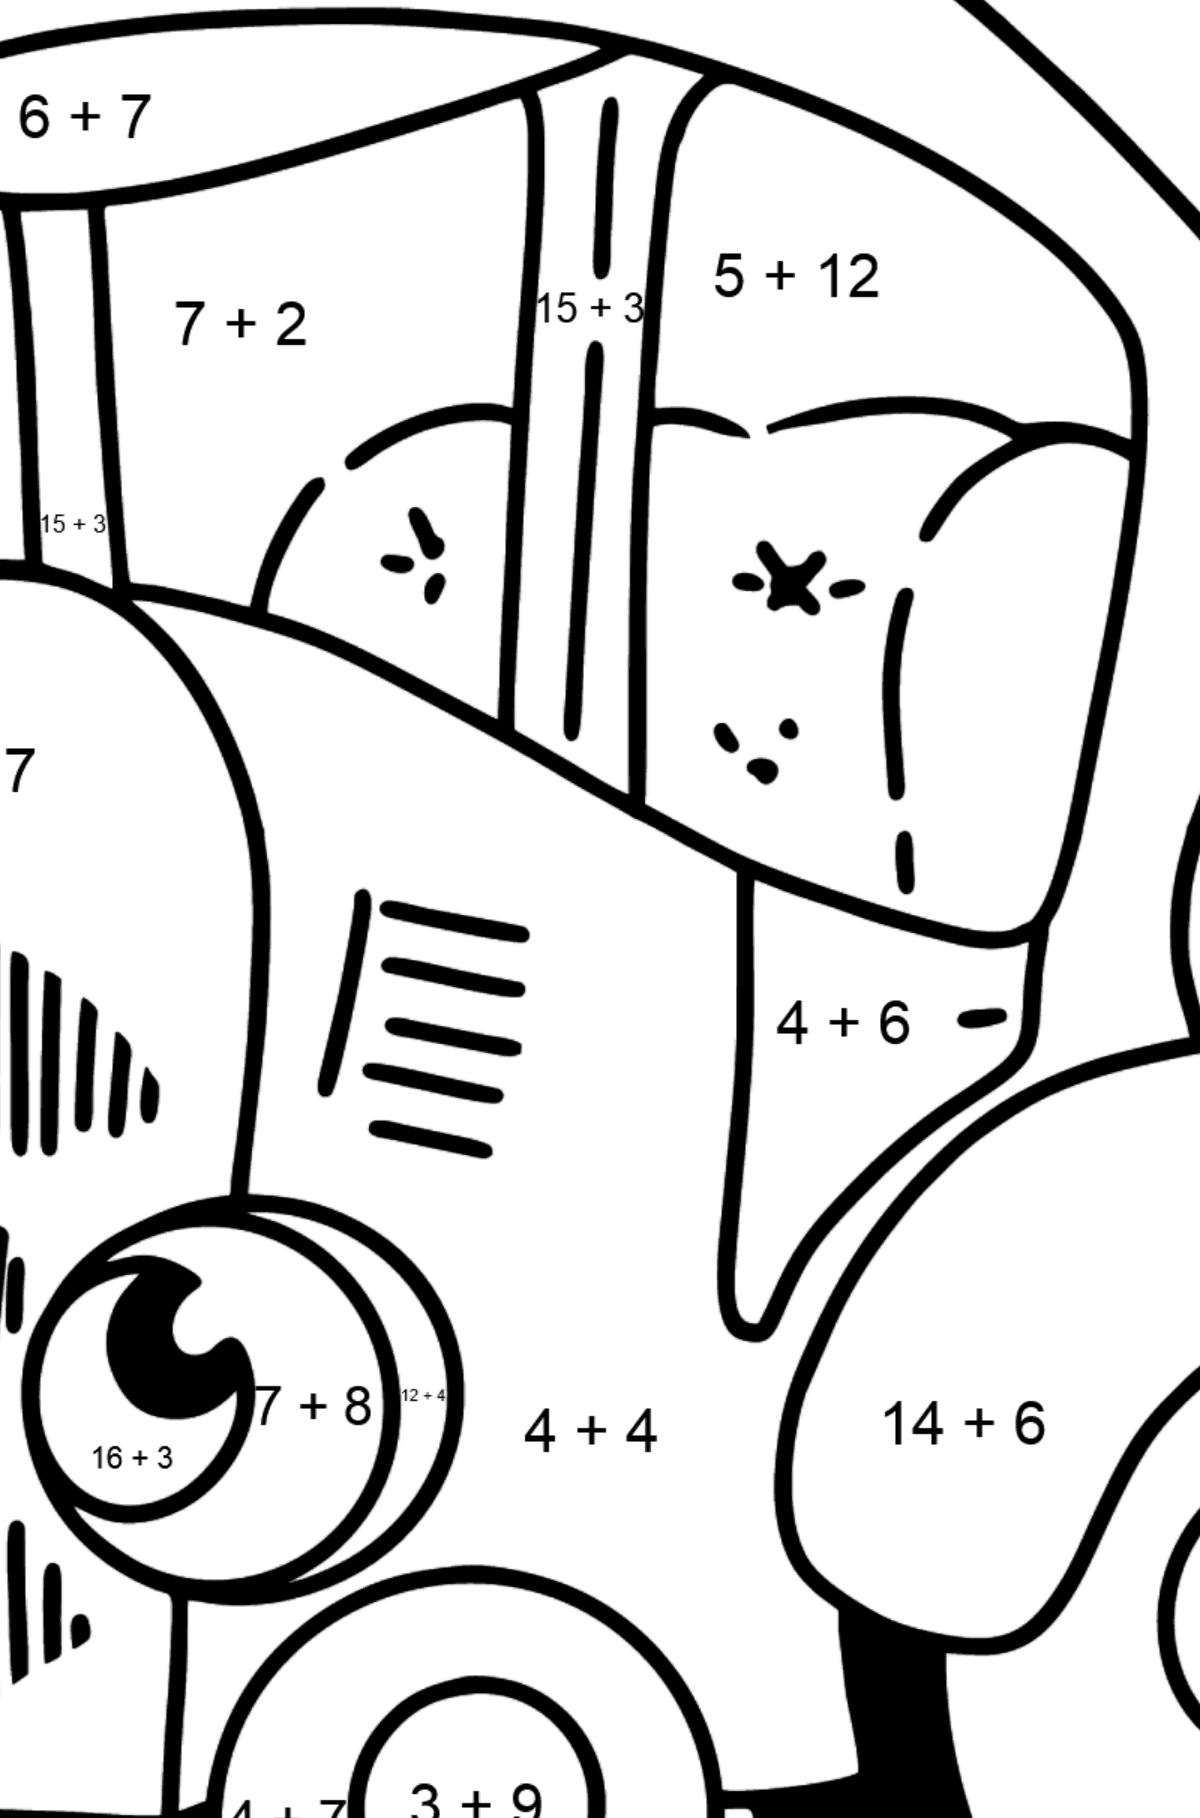 Blue Tractor coloring page - Math Coloring - Addition for Kids